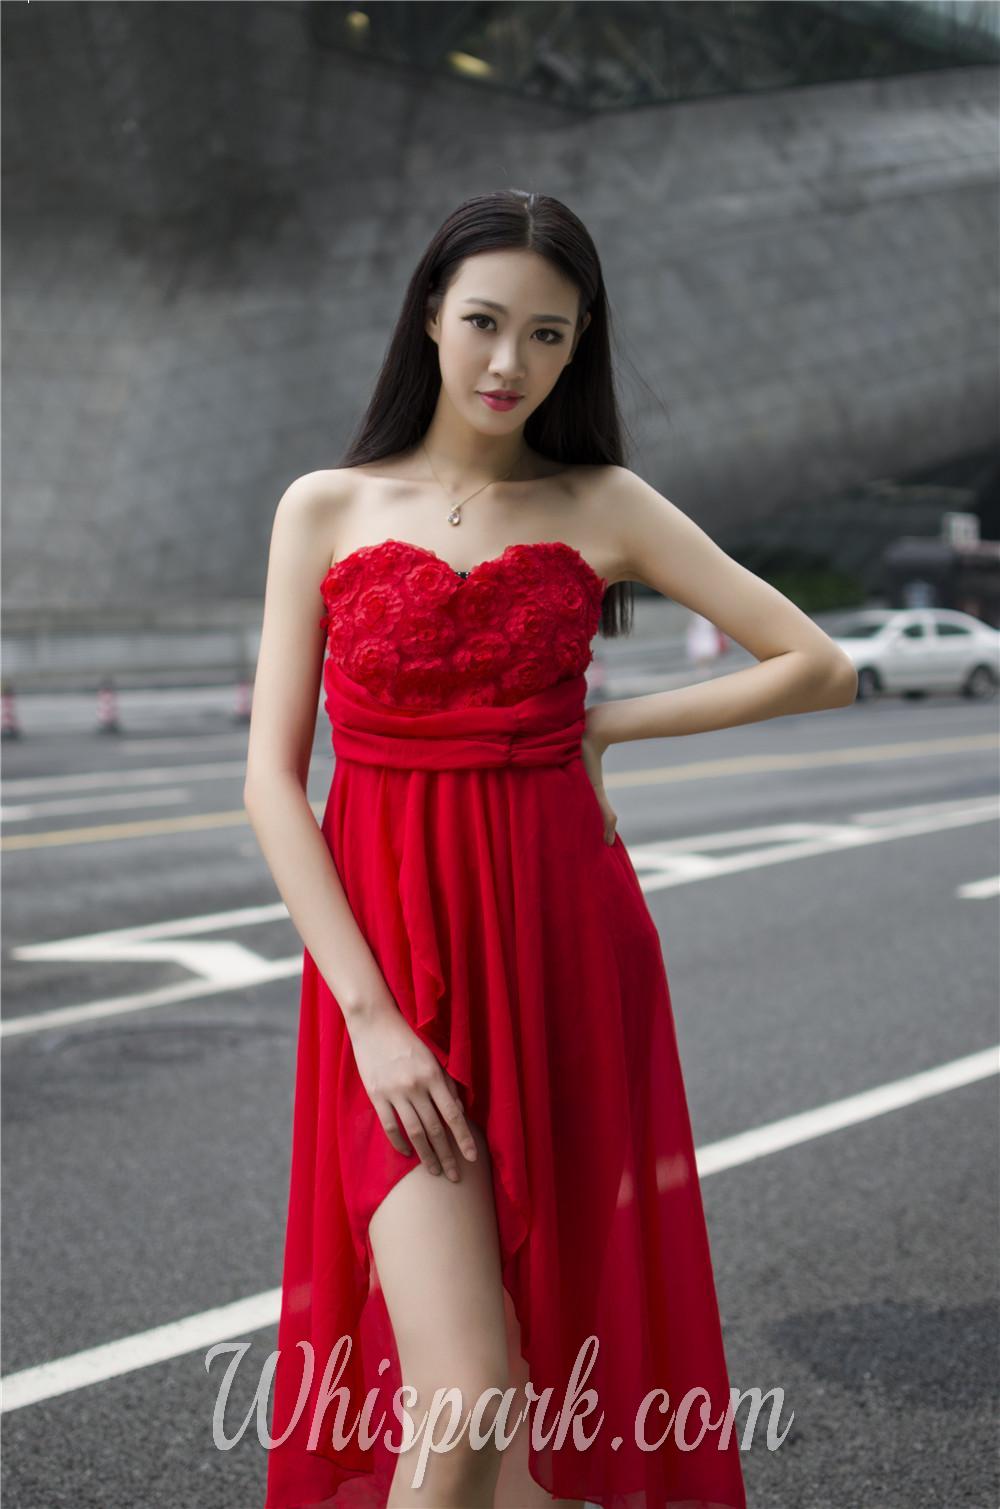 Your New Years Gift-Asian Girl In Charming Red, Has Arrived! Please Check!